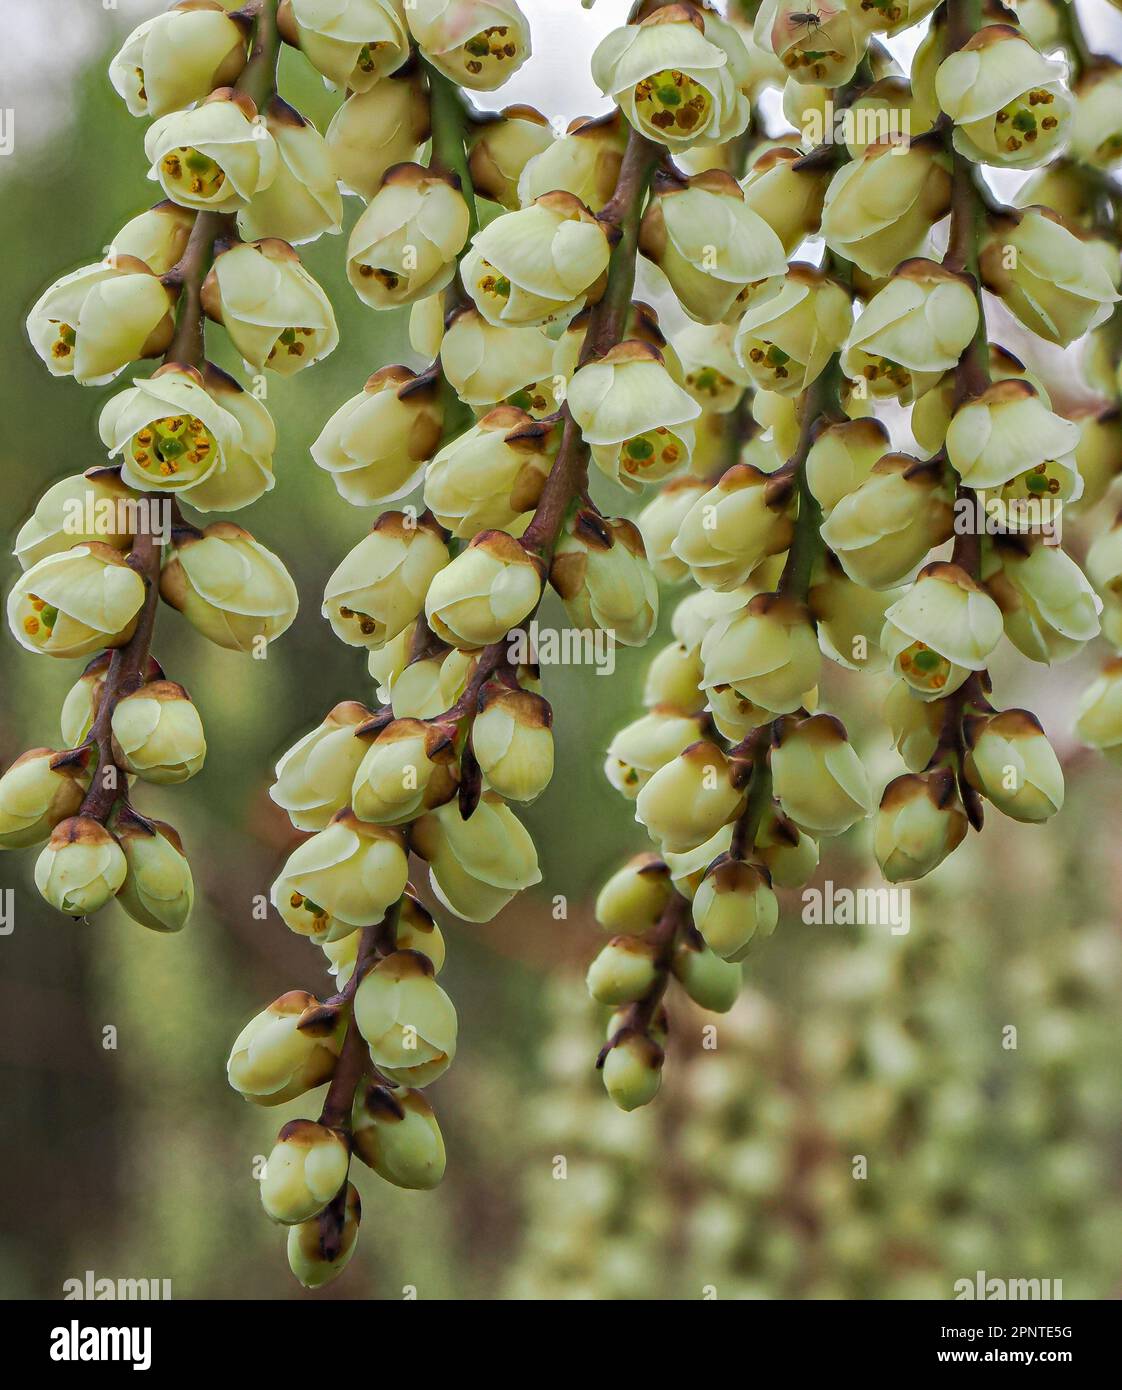 Racemes of bell-shaped flowers of Chinese Stachyurus S. chinensis an attractive shrub native to China and Taiwan grown as an ornamental garden plant Stock Photo